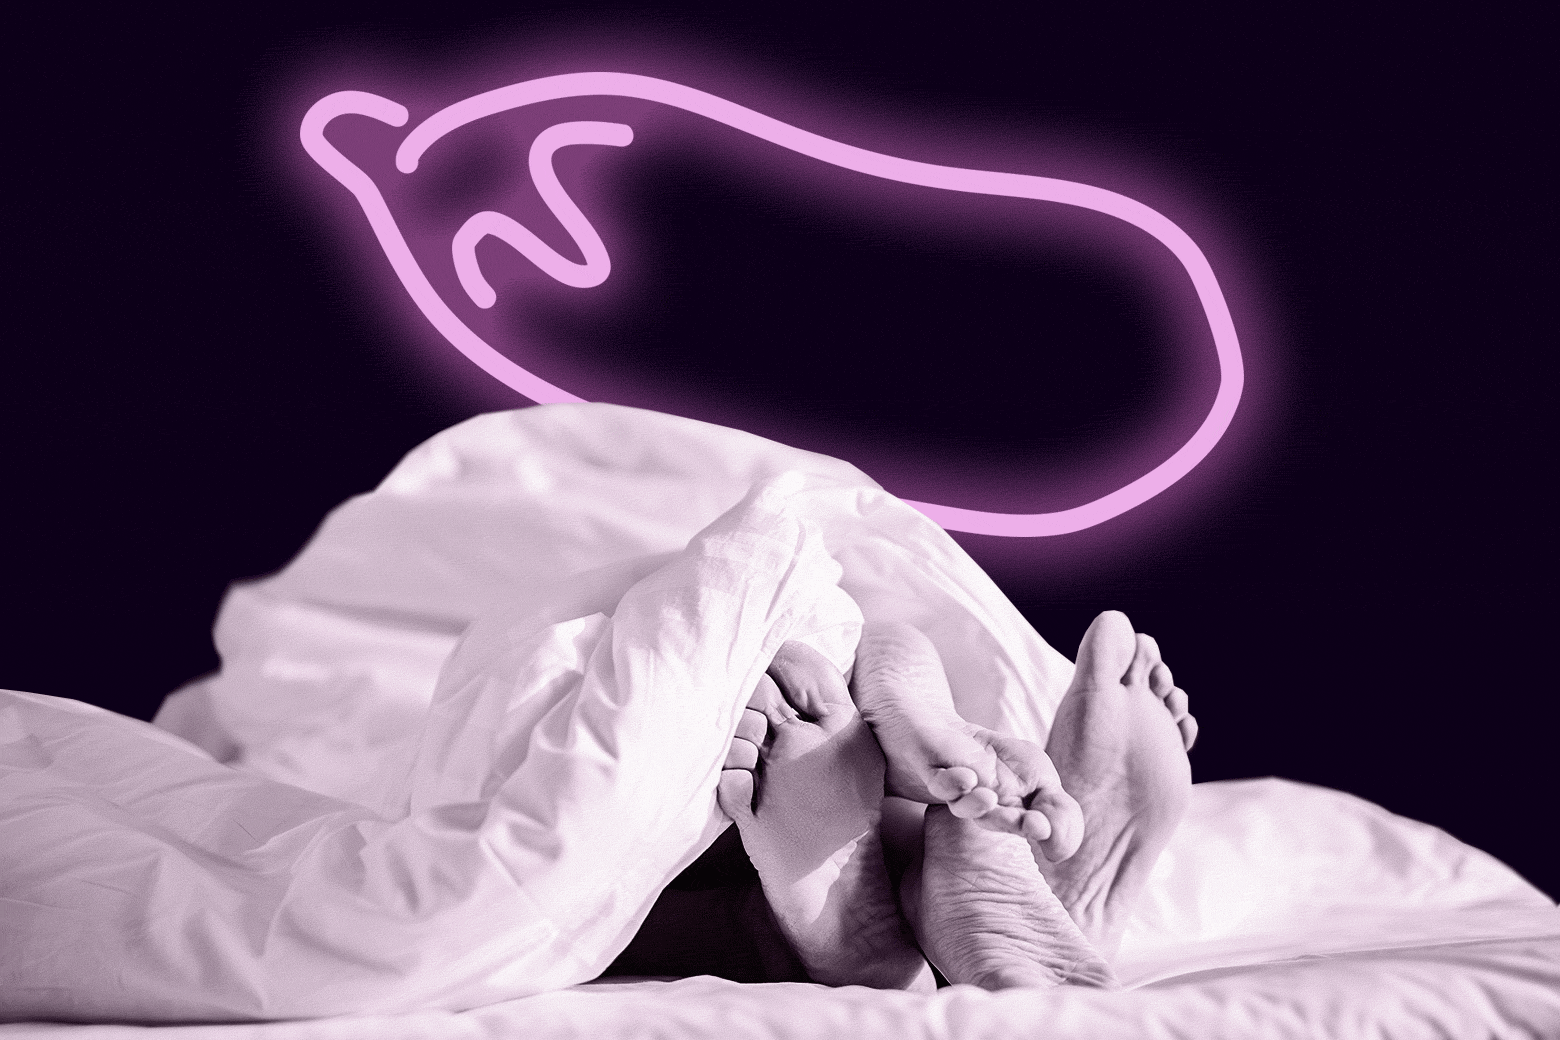 Couple in bed with an eggplant emoji.